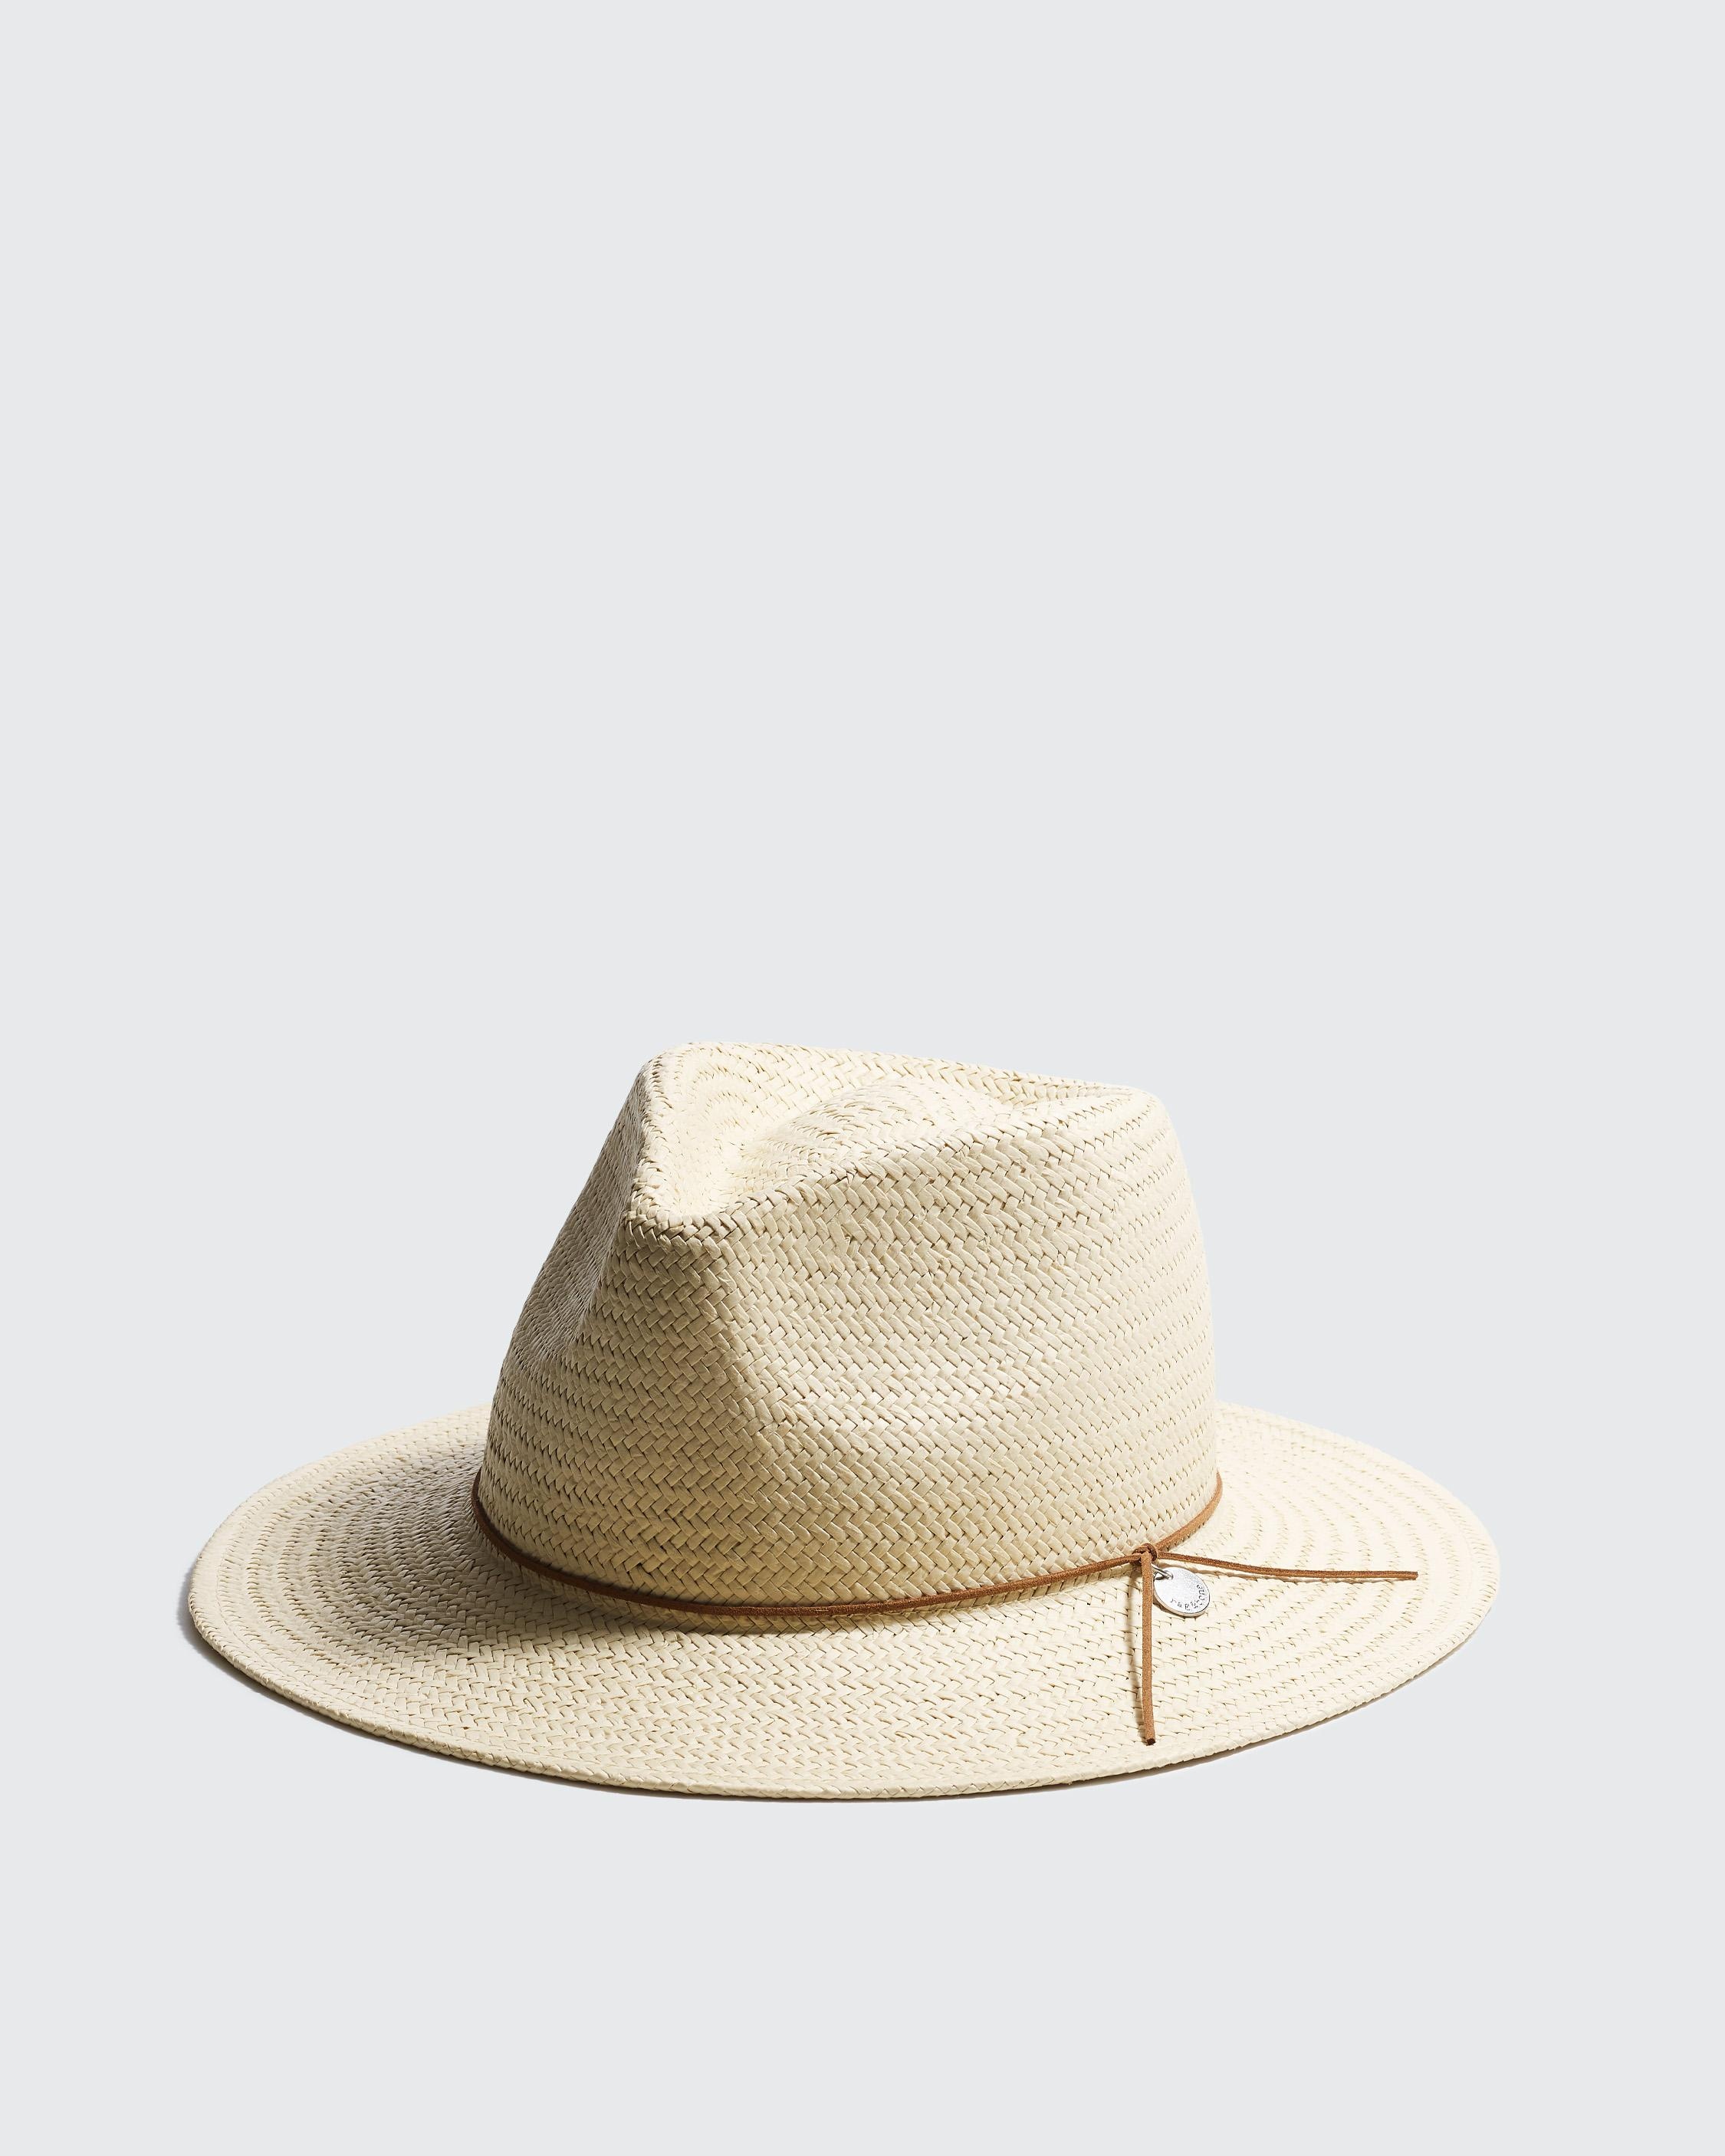 Packable Fedora
Straw Hat - 1